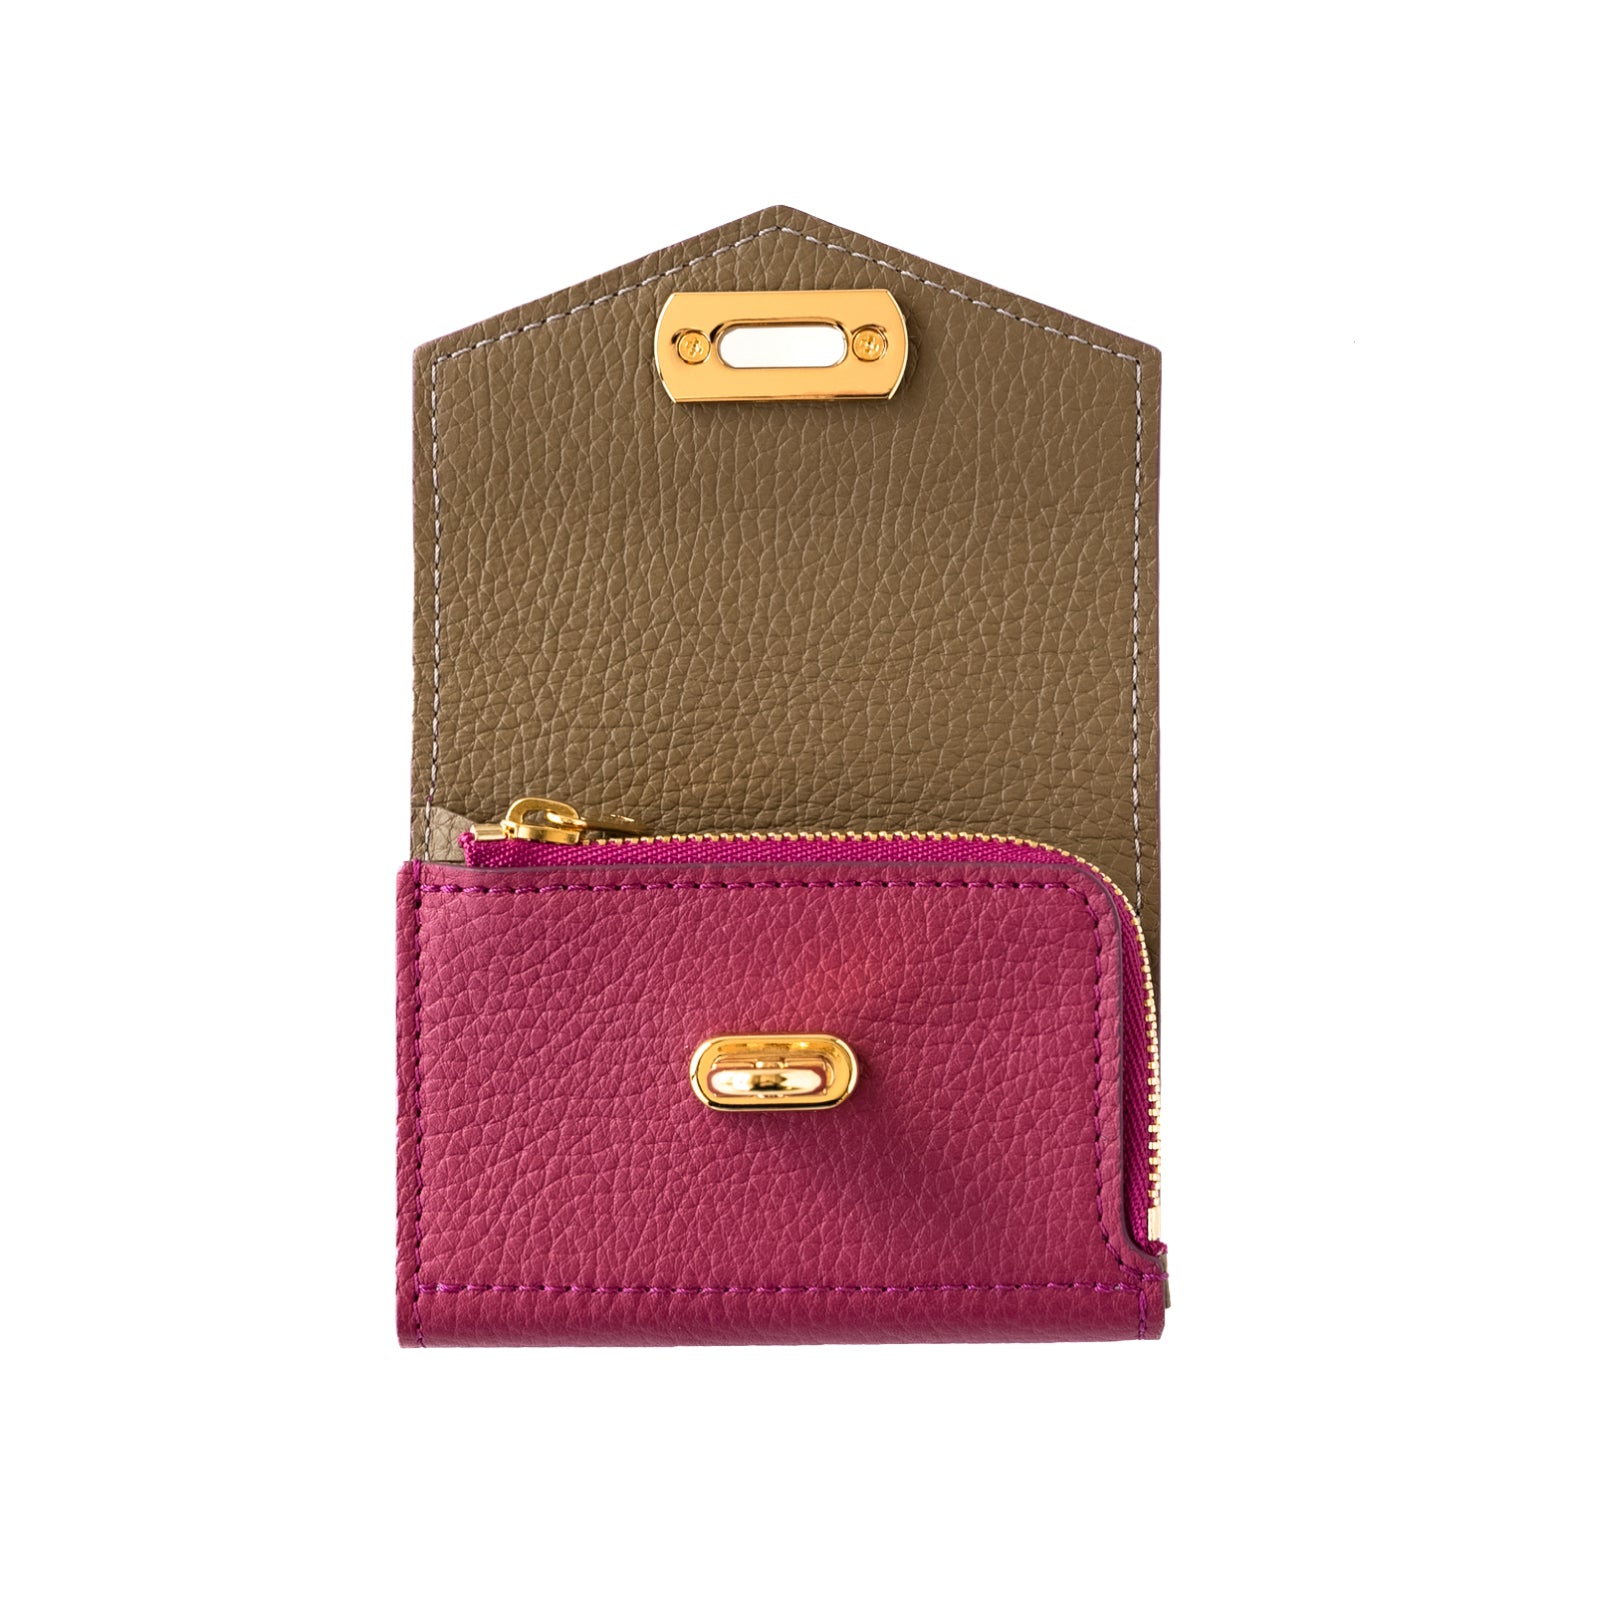 [Color order] Handy Wallet Opera Taurillon Clemence